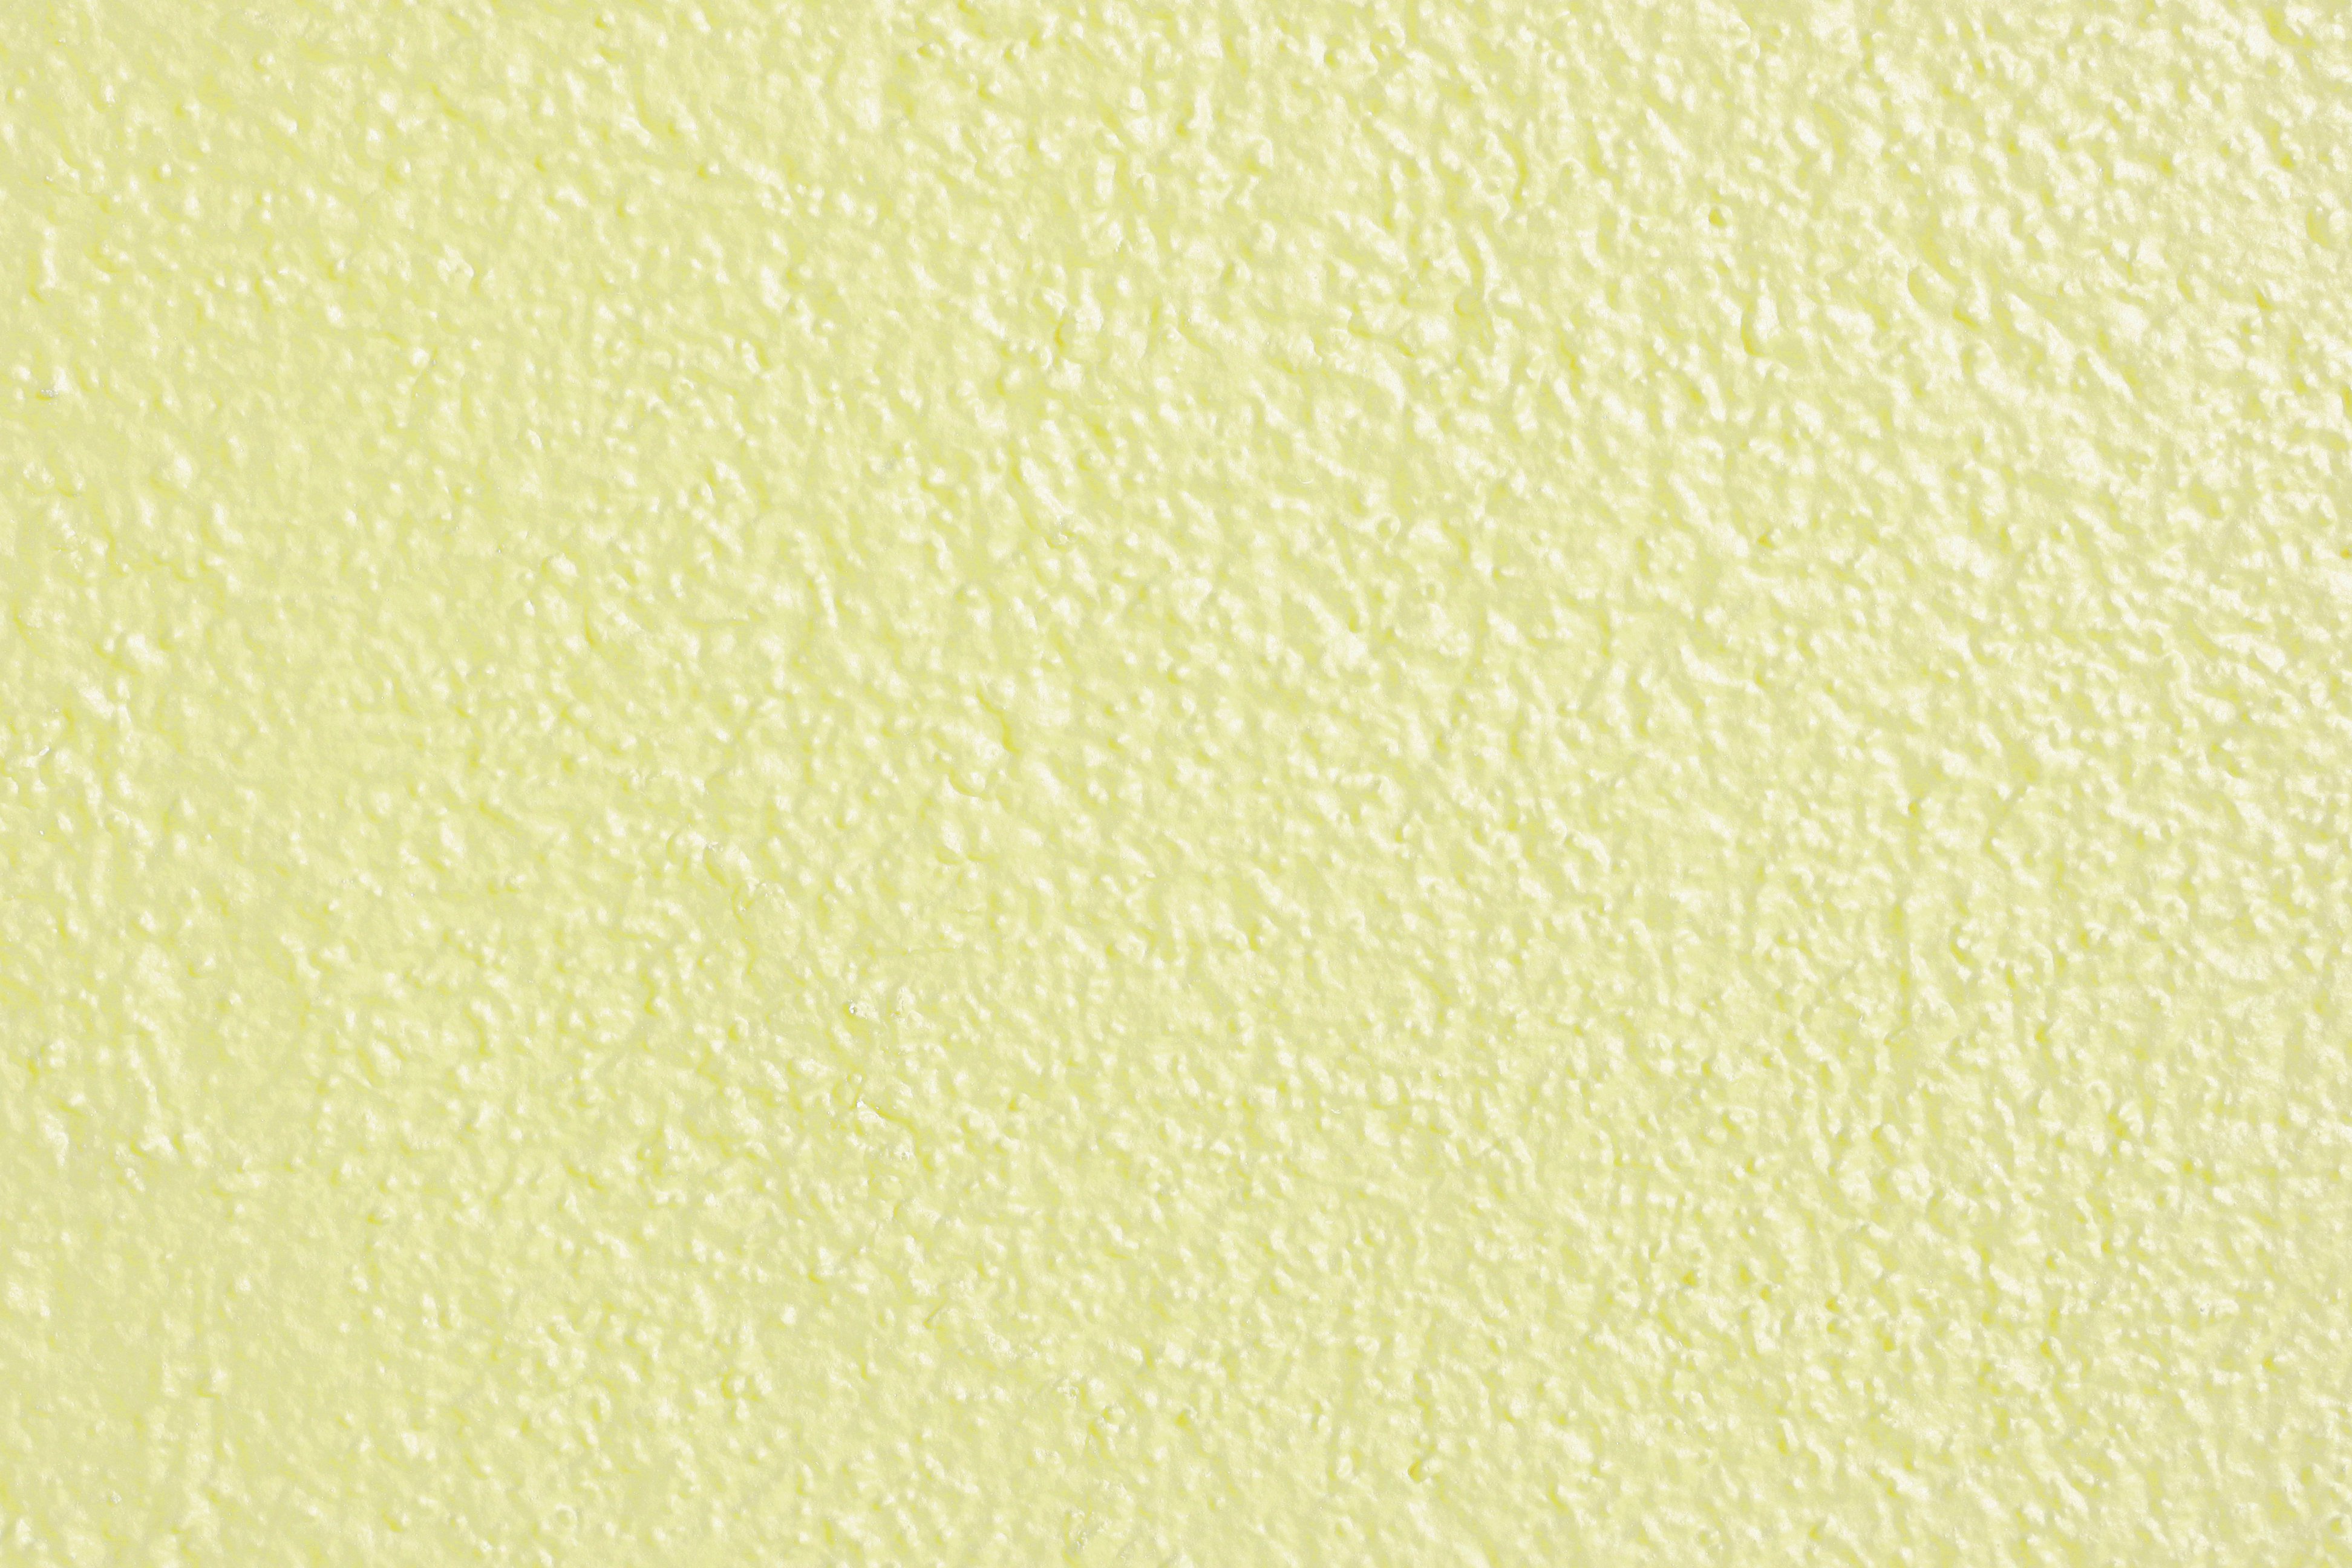 Pale Yellow Painted Wall Texture High Resolution Photo 3888x2592